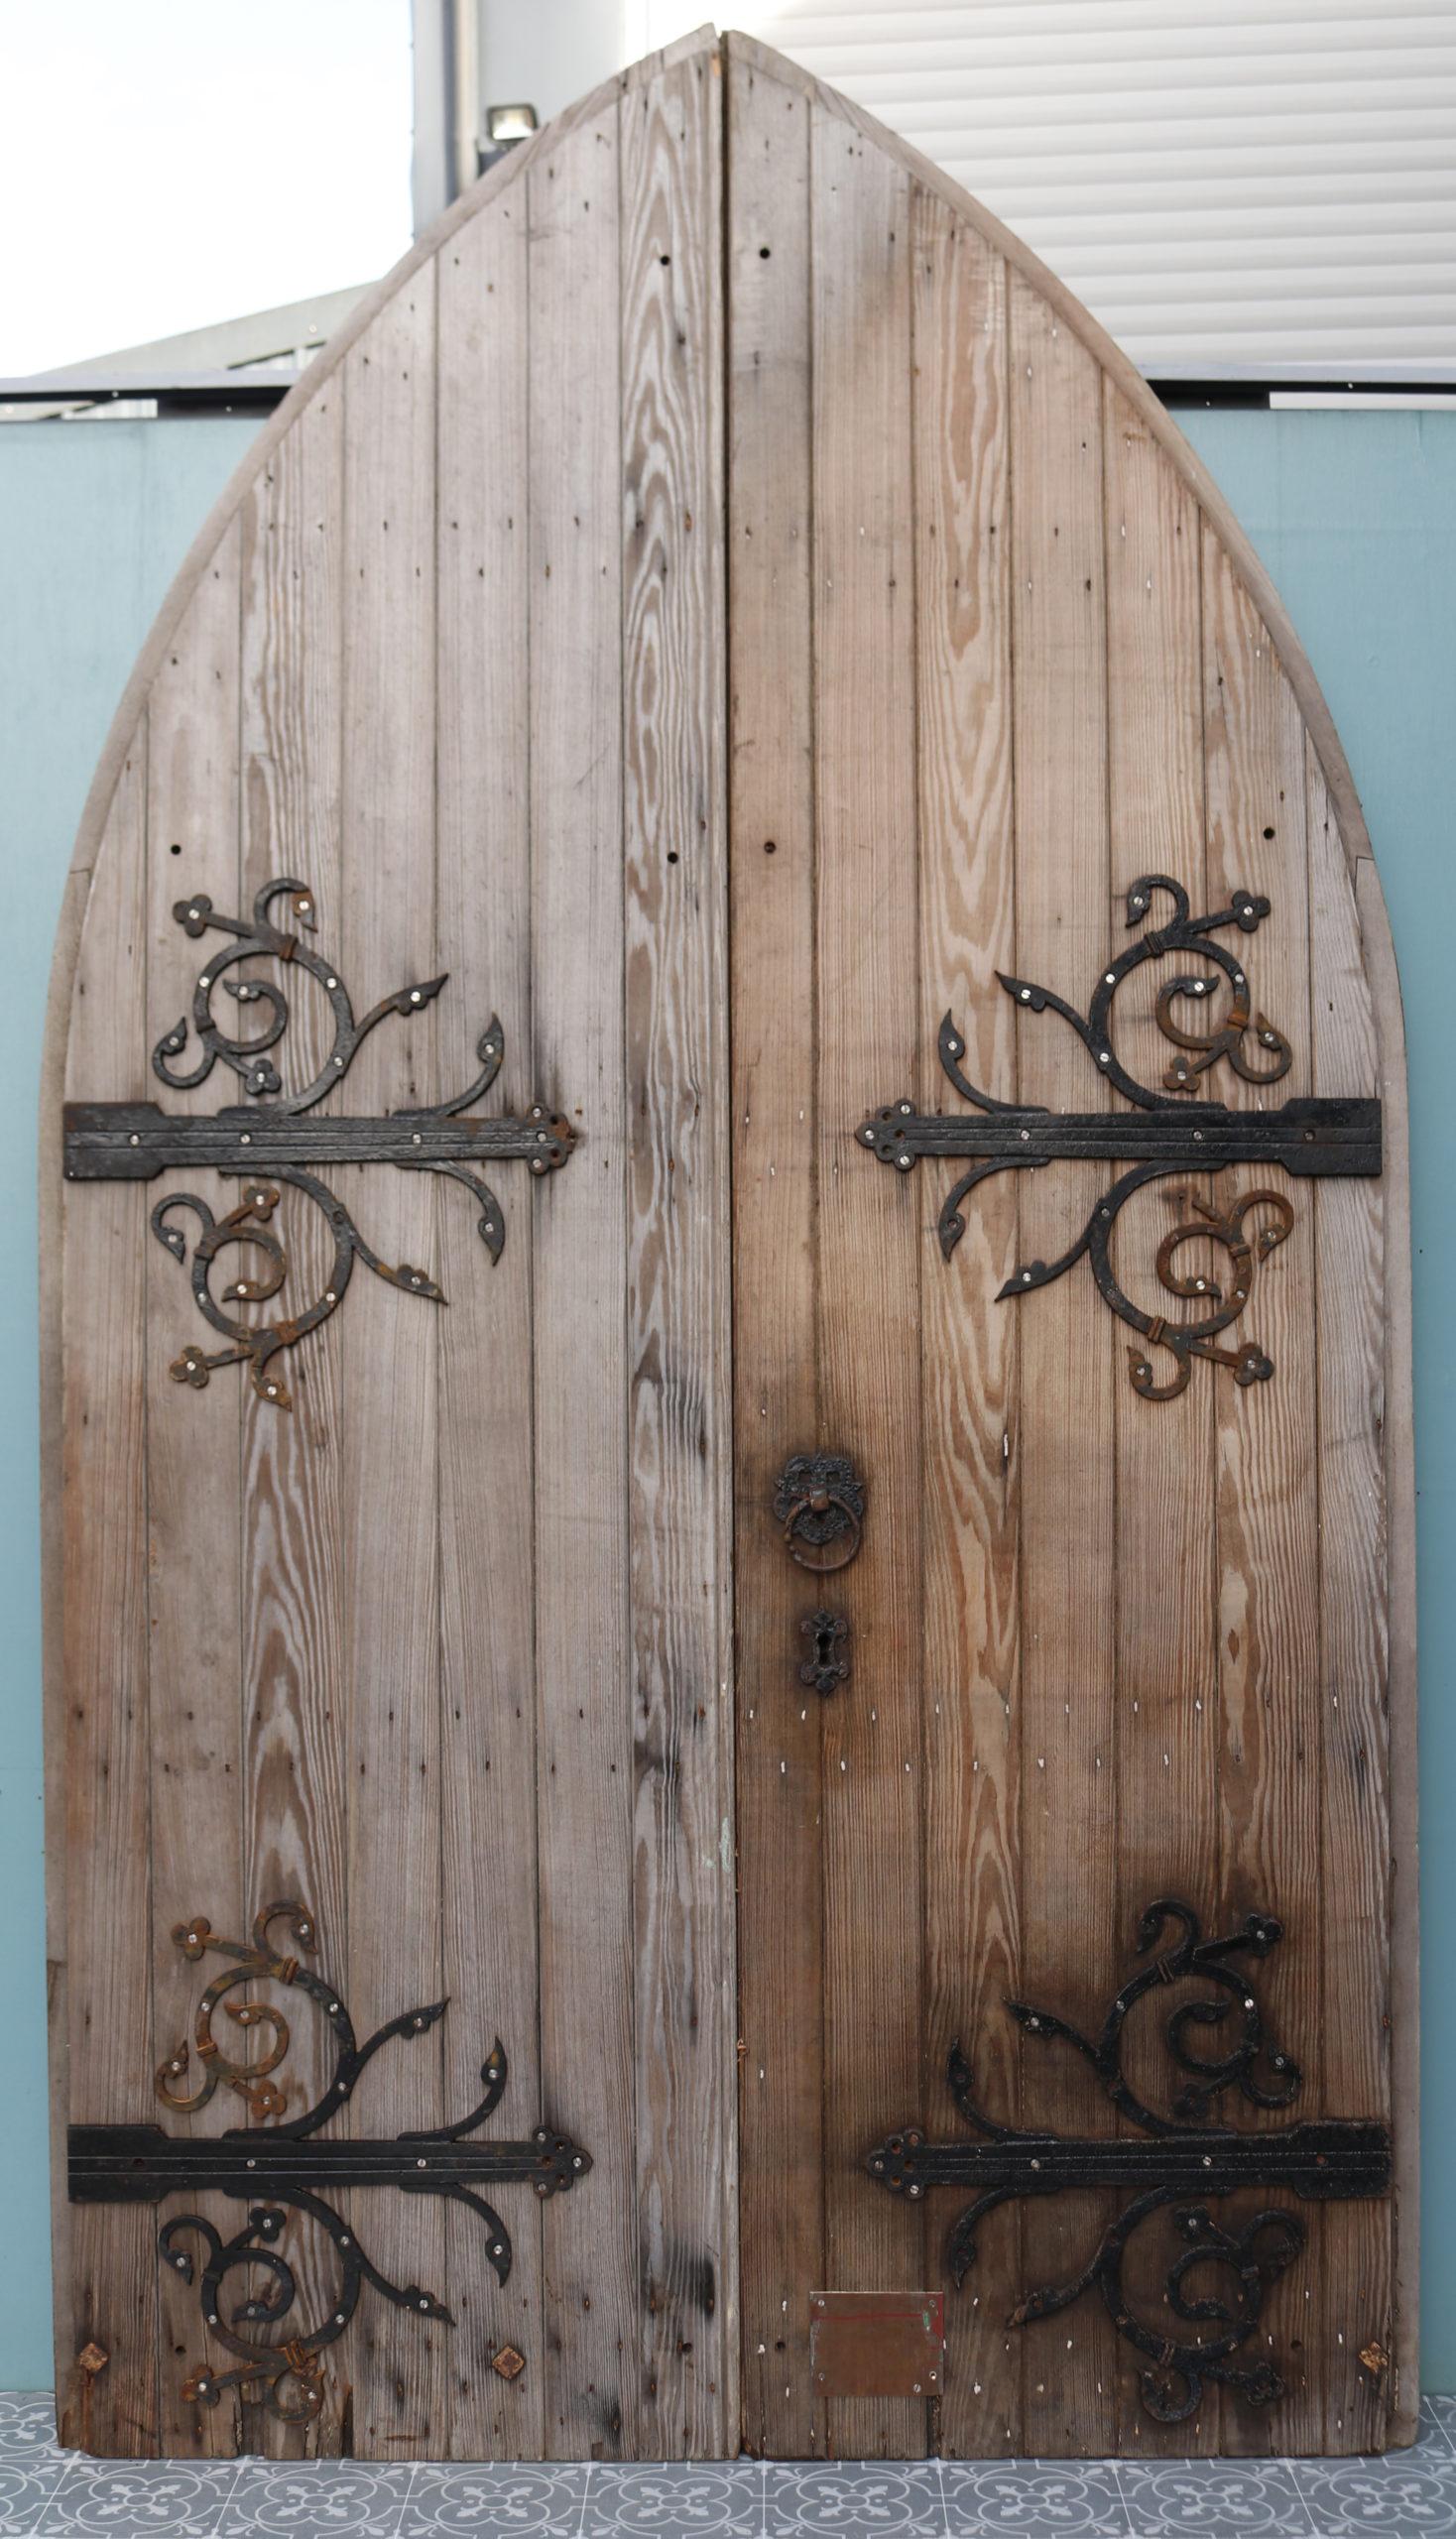 A pair of arched exterior pine doors salvaged from a church in Cambridgeshire.